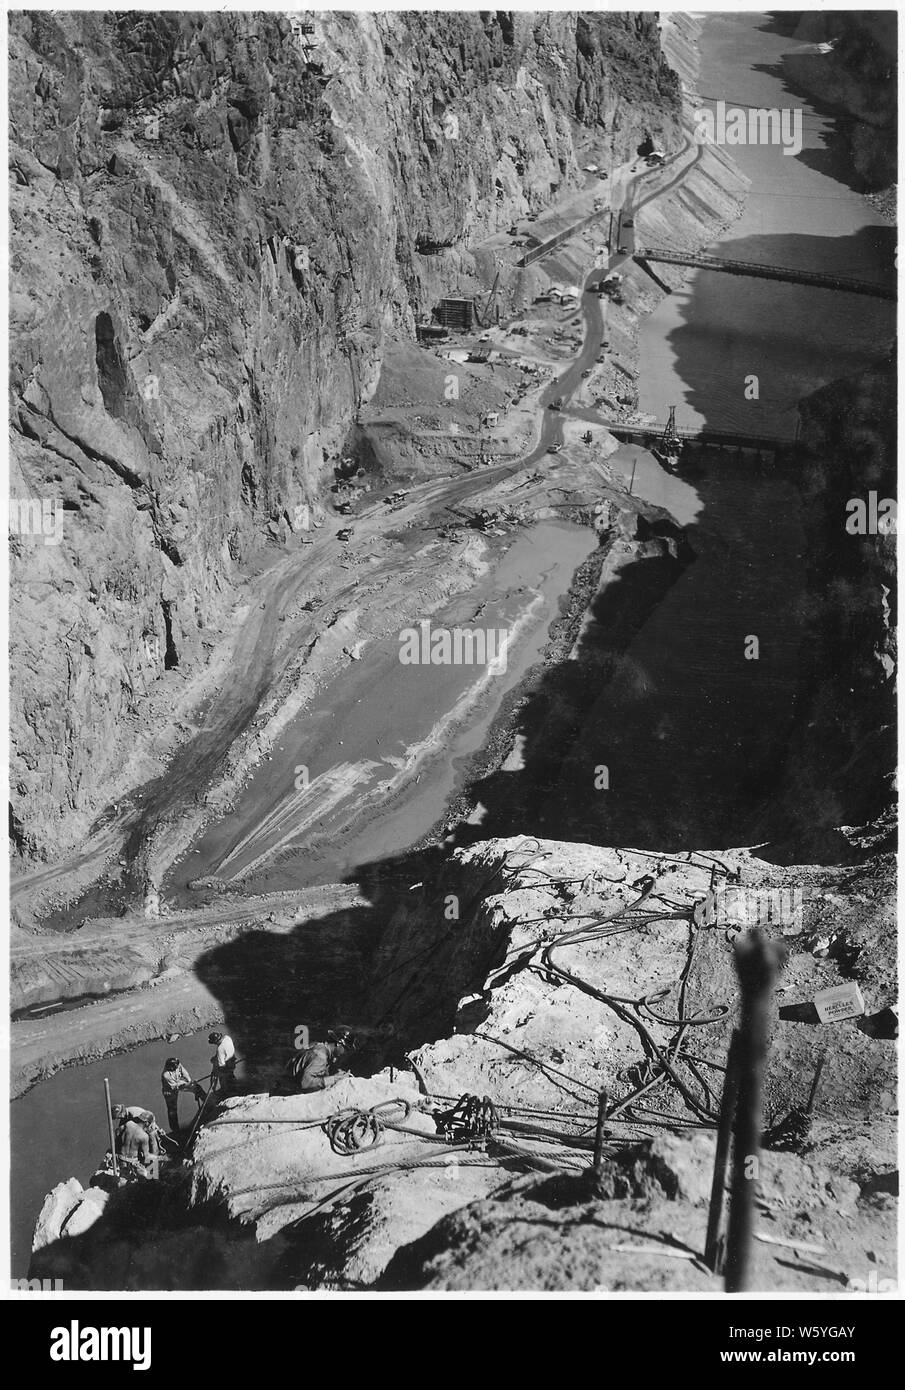 View looking into Black Canyon from rim of the Arizona wall showing operations in the early stages of the upper cofferdam construction; Scope and content:  Photograph from Volume Two of a series of photo albums documenting the construction of Hoover Dam, Boulder City, Nevada.  Full caption of photograph reads: View looking into Black Canyon from rim of the Arizona wall showing operations in the early stages of the upper cofferdam construction. Temporary cofferdam diverts river flow through Arizona side of channel. Nevada side inside temporary cofferdam is partially unwatered and muck is being Stock Photo